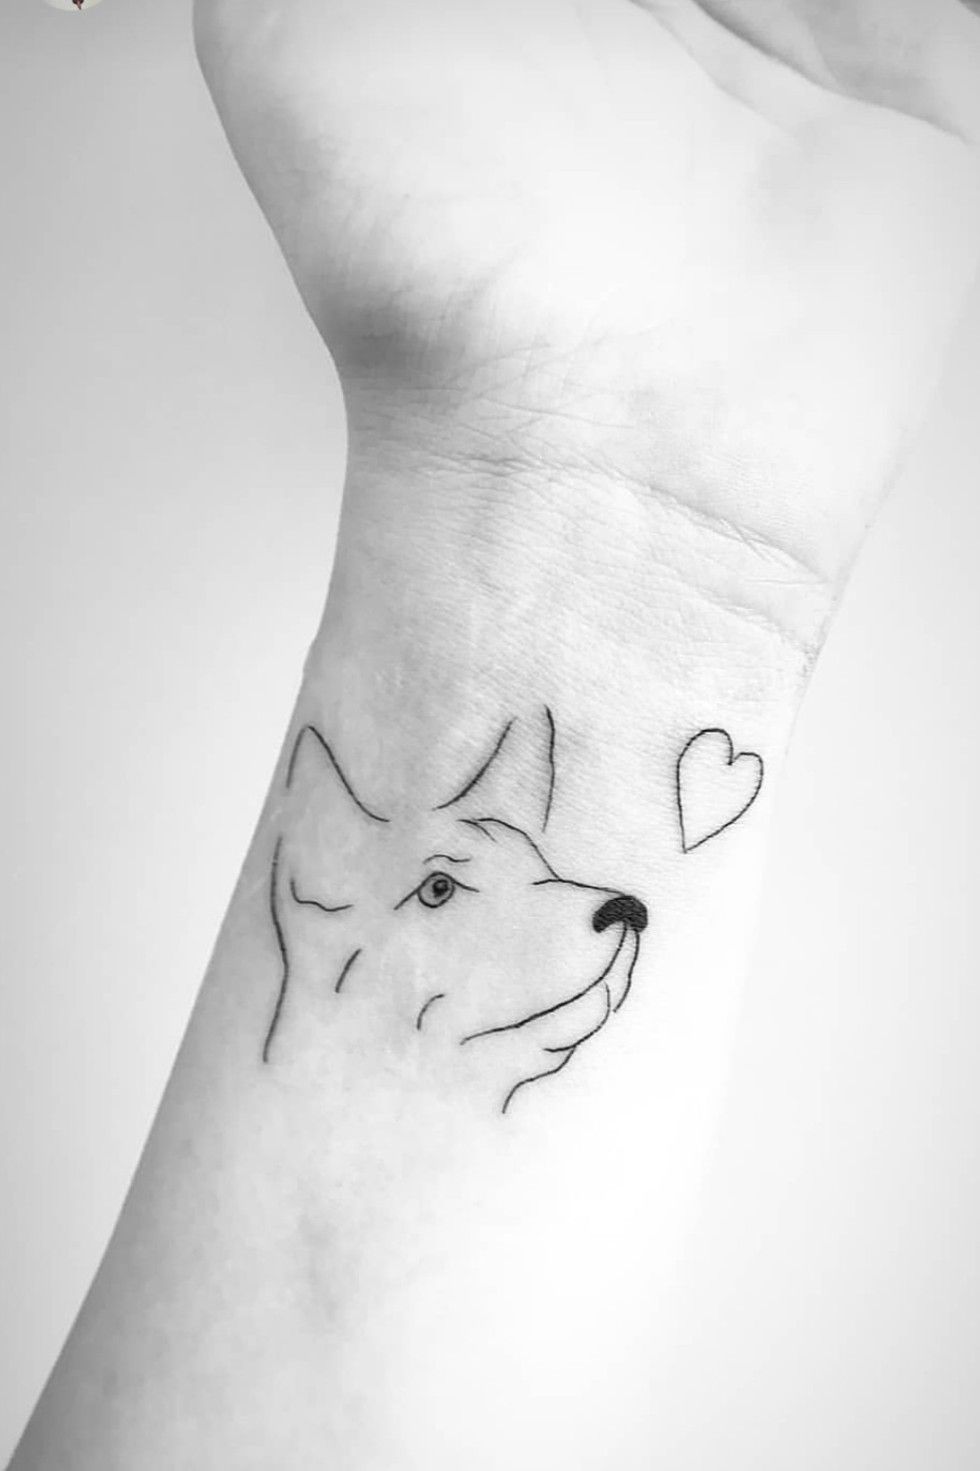 10 Delicate And Small Tattoo Ideas That You Wont Regret